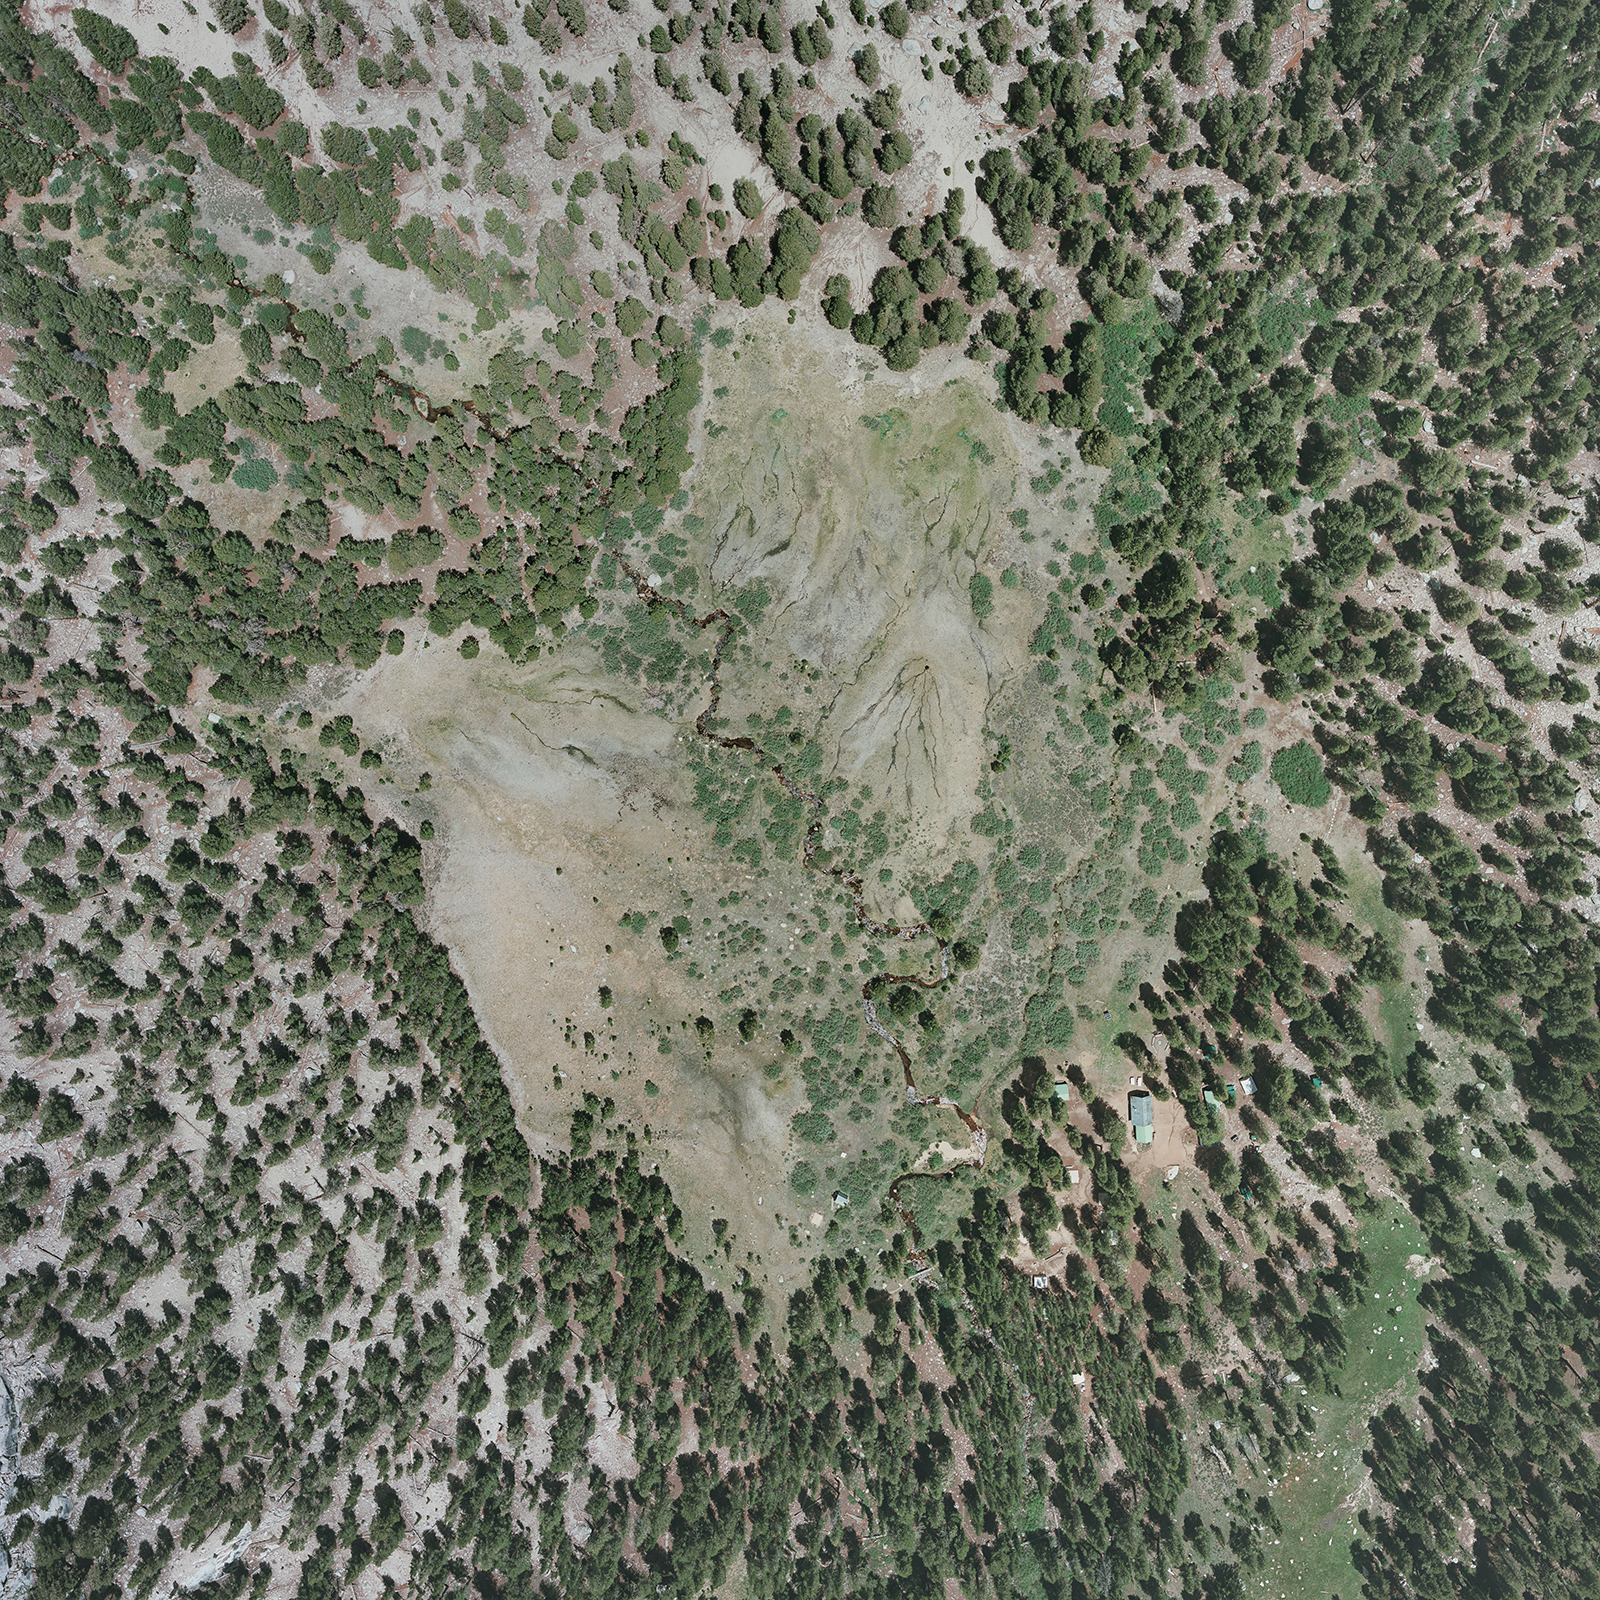 We performed a topographic and aerial survey of the Golden Trout Wilderness Camp, necessary for design updates and overall planning of the campgrounds. The work included target setting; enclosing the campsite control targets for an aerial flyover of the campsite. With the help of pack mules, our survey team hiked roughly 3 miles to an elevation above 10,000 ft with survey and personal equipment and spent 3 days at the campsite. NorthStar partnered with Point Co., a photogrammetry consultant, to capture high resolution imagery of the campsite. NorthStar also performed a conventional ground survey of the main use areas. Golden Trout Wilderness School was a unique experience for our surveyors due to its remote location and rugged terrain. This was an amazing opportunity for the survey crew to experience the beauty of the Sierra Nevada and learn about wilderness preservation efforts. Helping Golden Trout Wilderness School, who’s been operational for over a century, to continue their educational endeavors was a great honor to NorthStar.